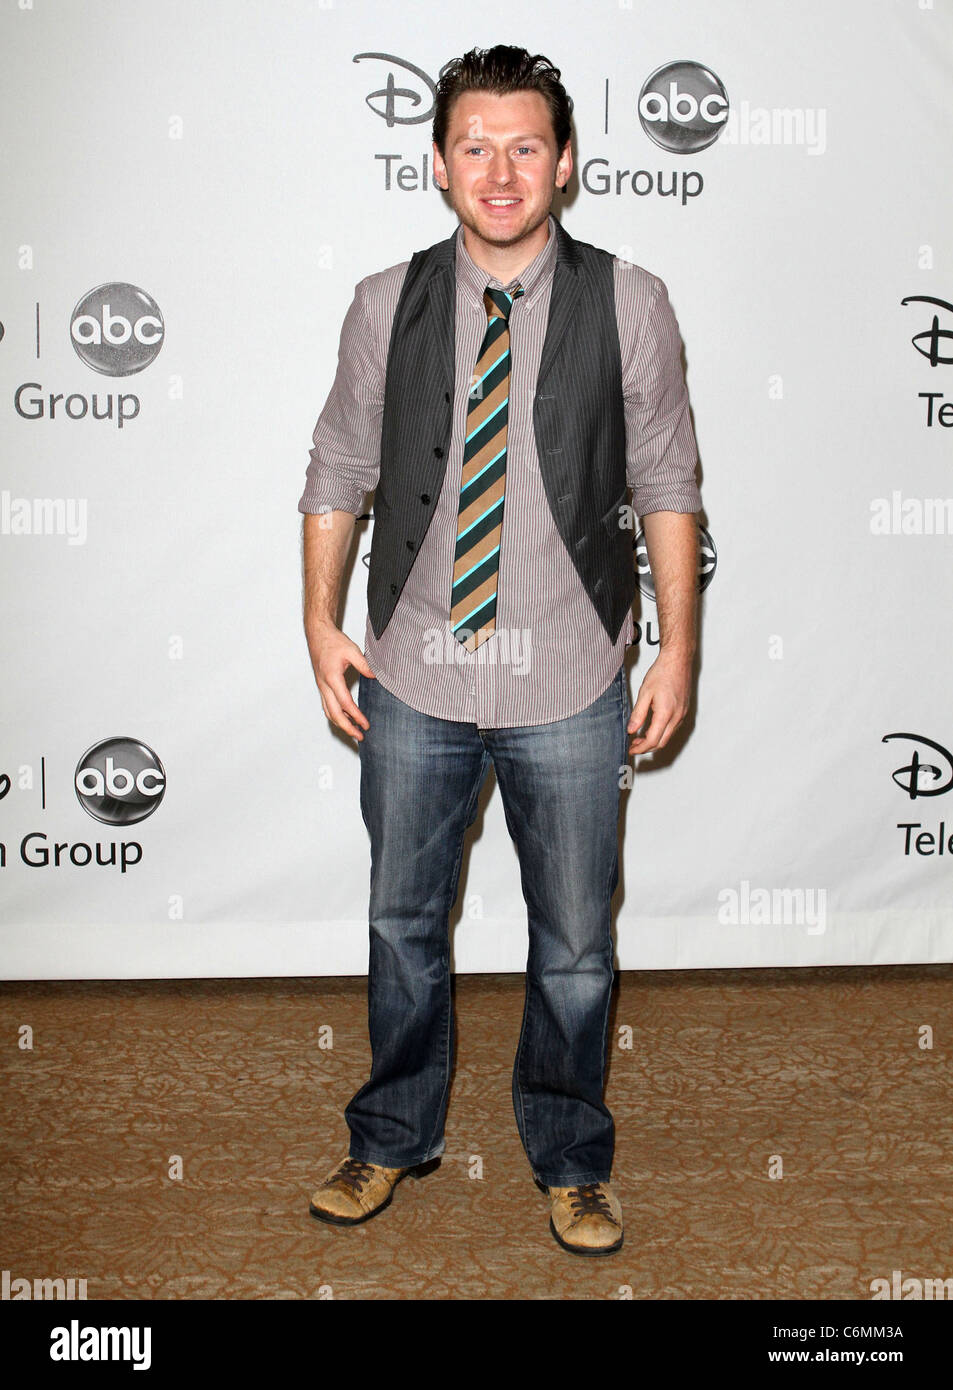 Keir O'Donnell Disney ABC Family 2010 Summer TCA Tour held at The Beverly Hilton Hotel Beverly Hills, USA - 01.08.10 Stock Photo